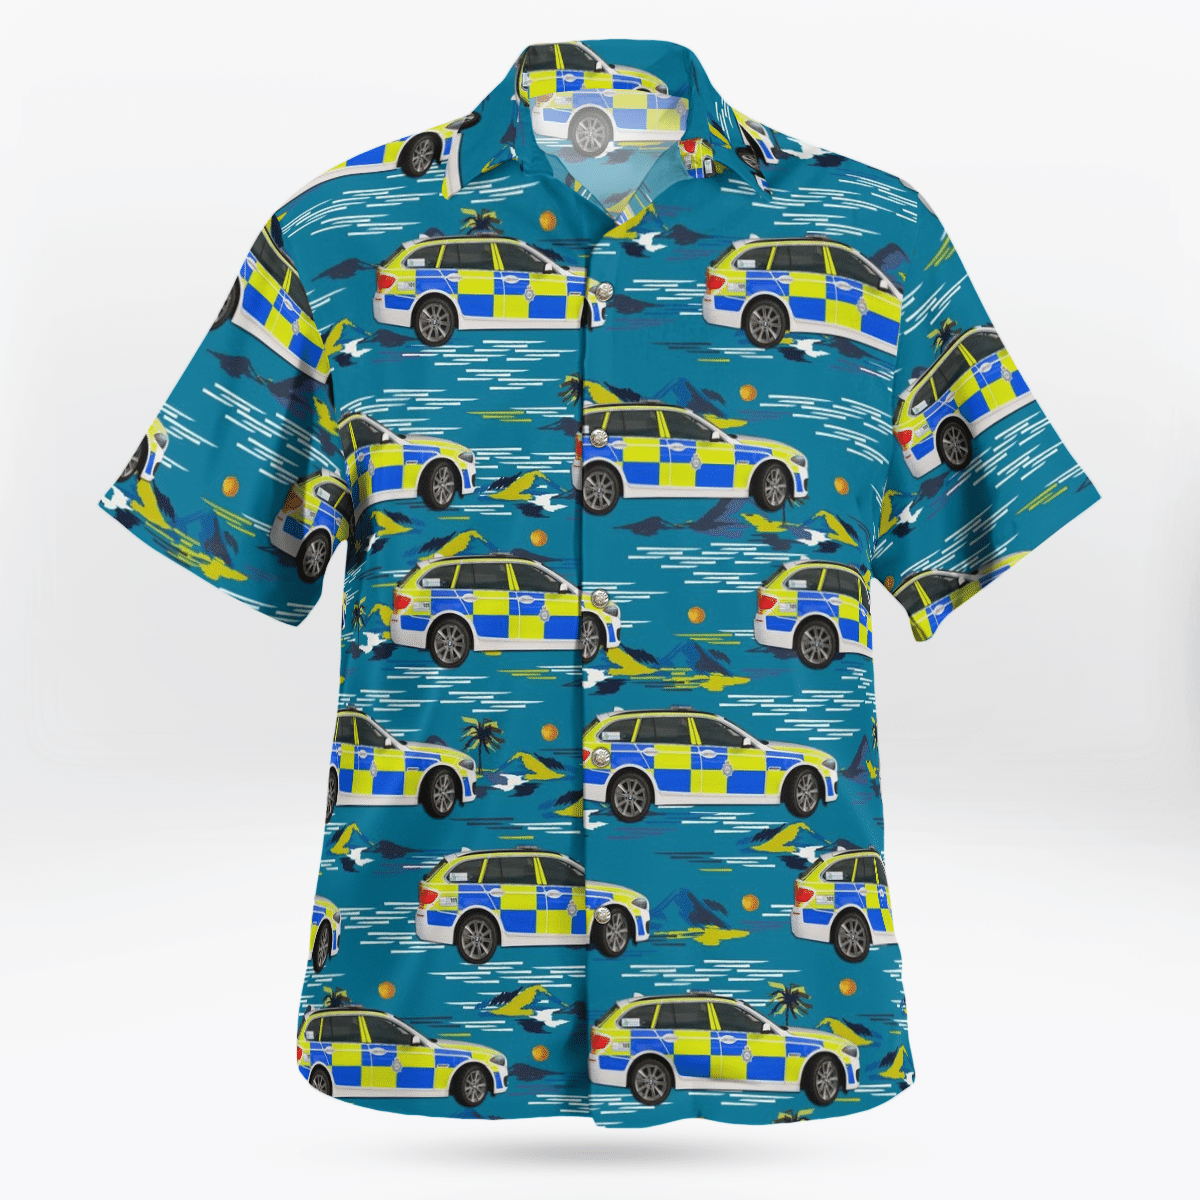 Hawaiian shirts never go out of style 100